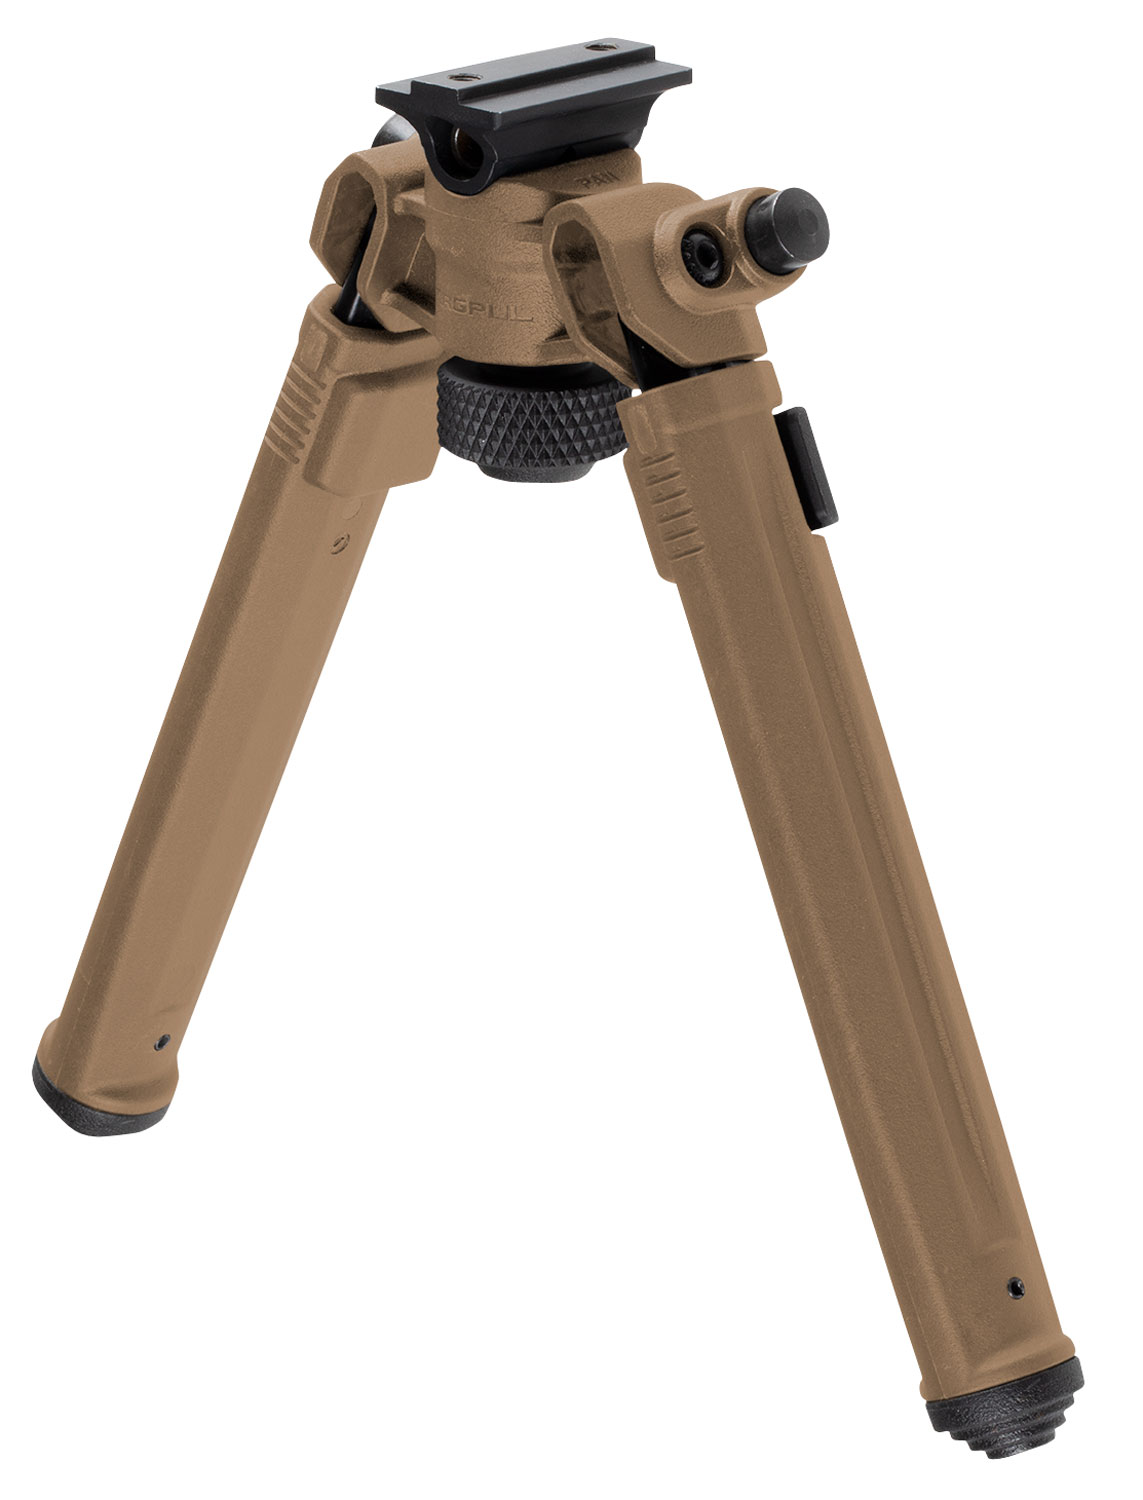 Magpul MAG951-FDE Bipod  made of Aluminum with Flat Dark Earth Finish, ARMS 17S-Style Attachment, 6.80-10.30